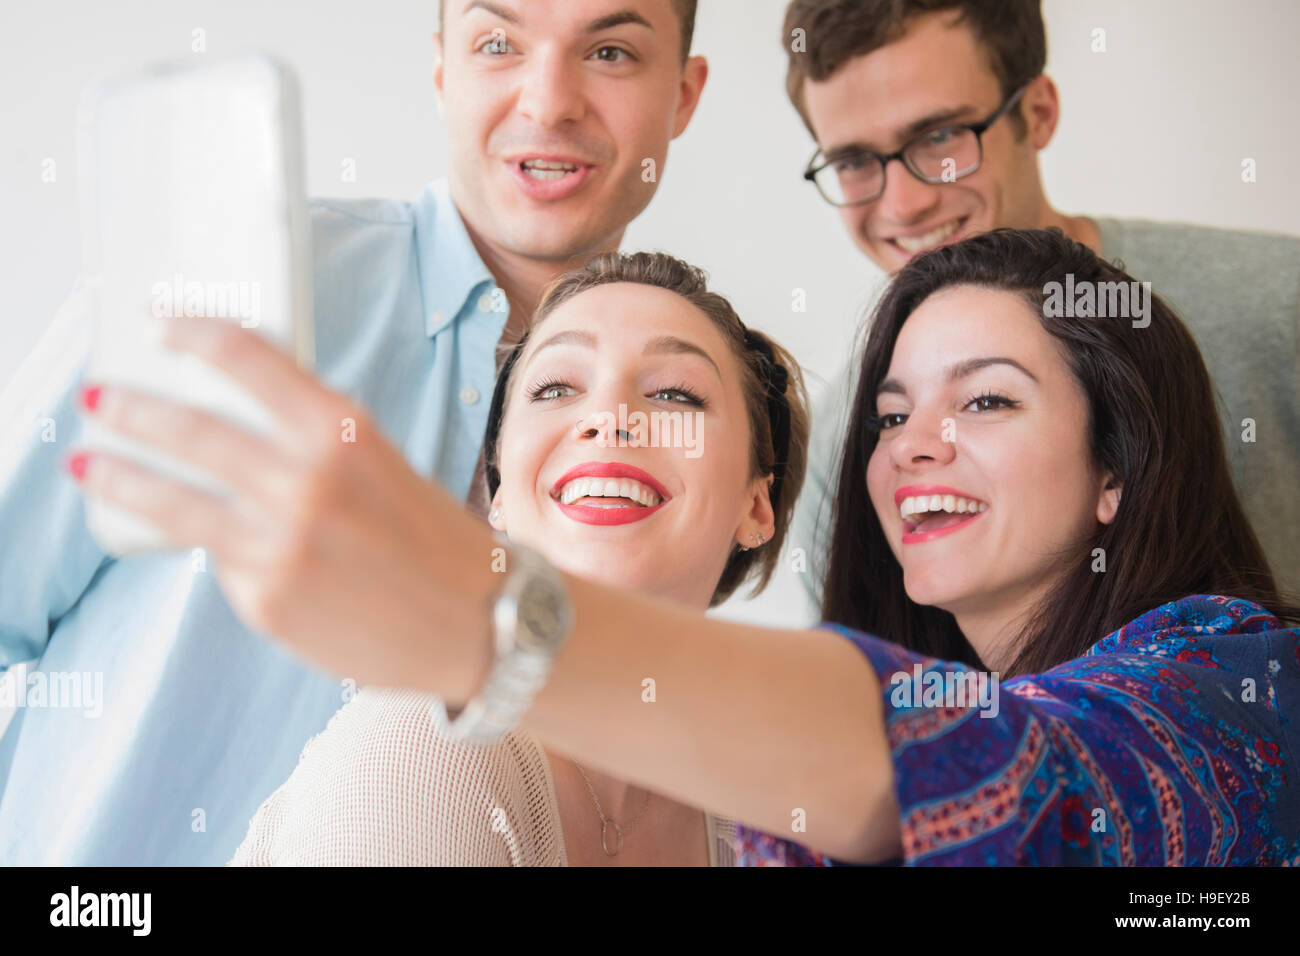 Smiling Caucasian friends posing for cell phone selfie Stock Photo